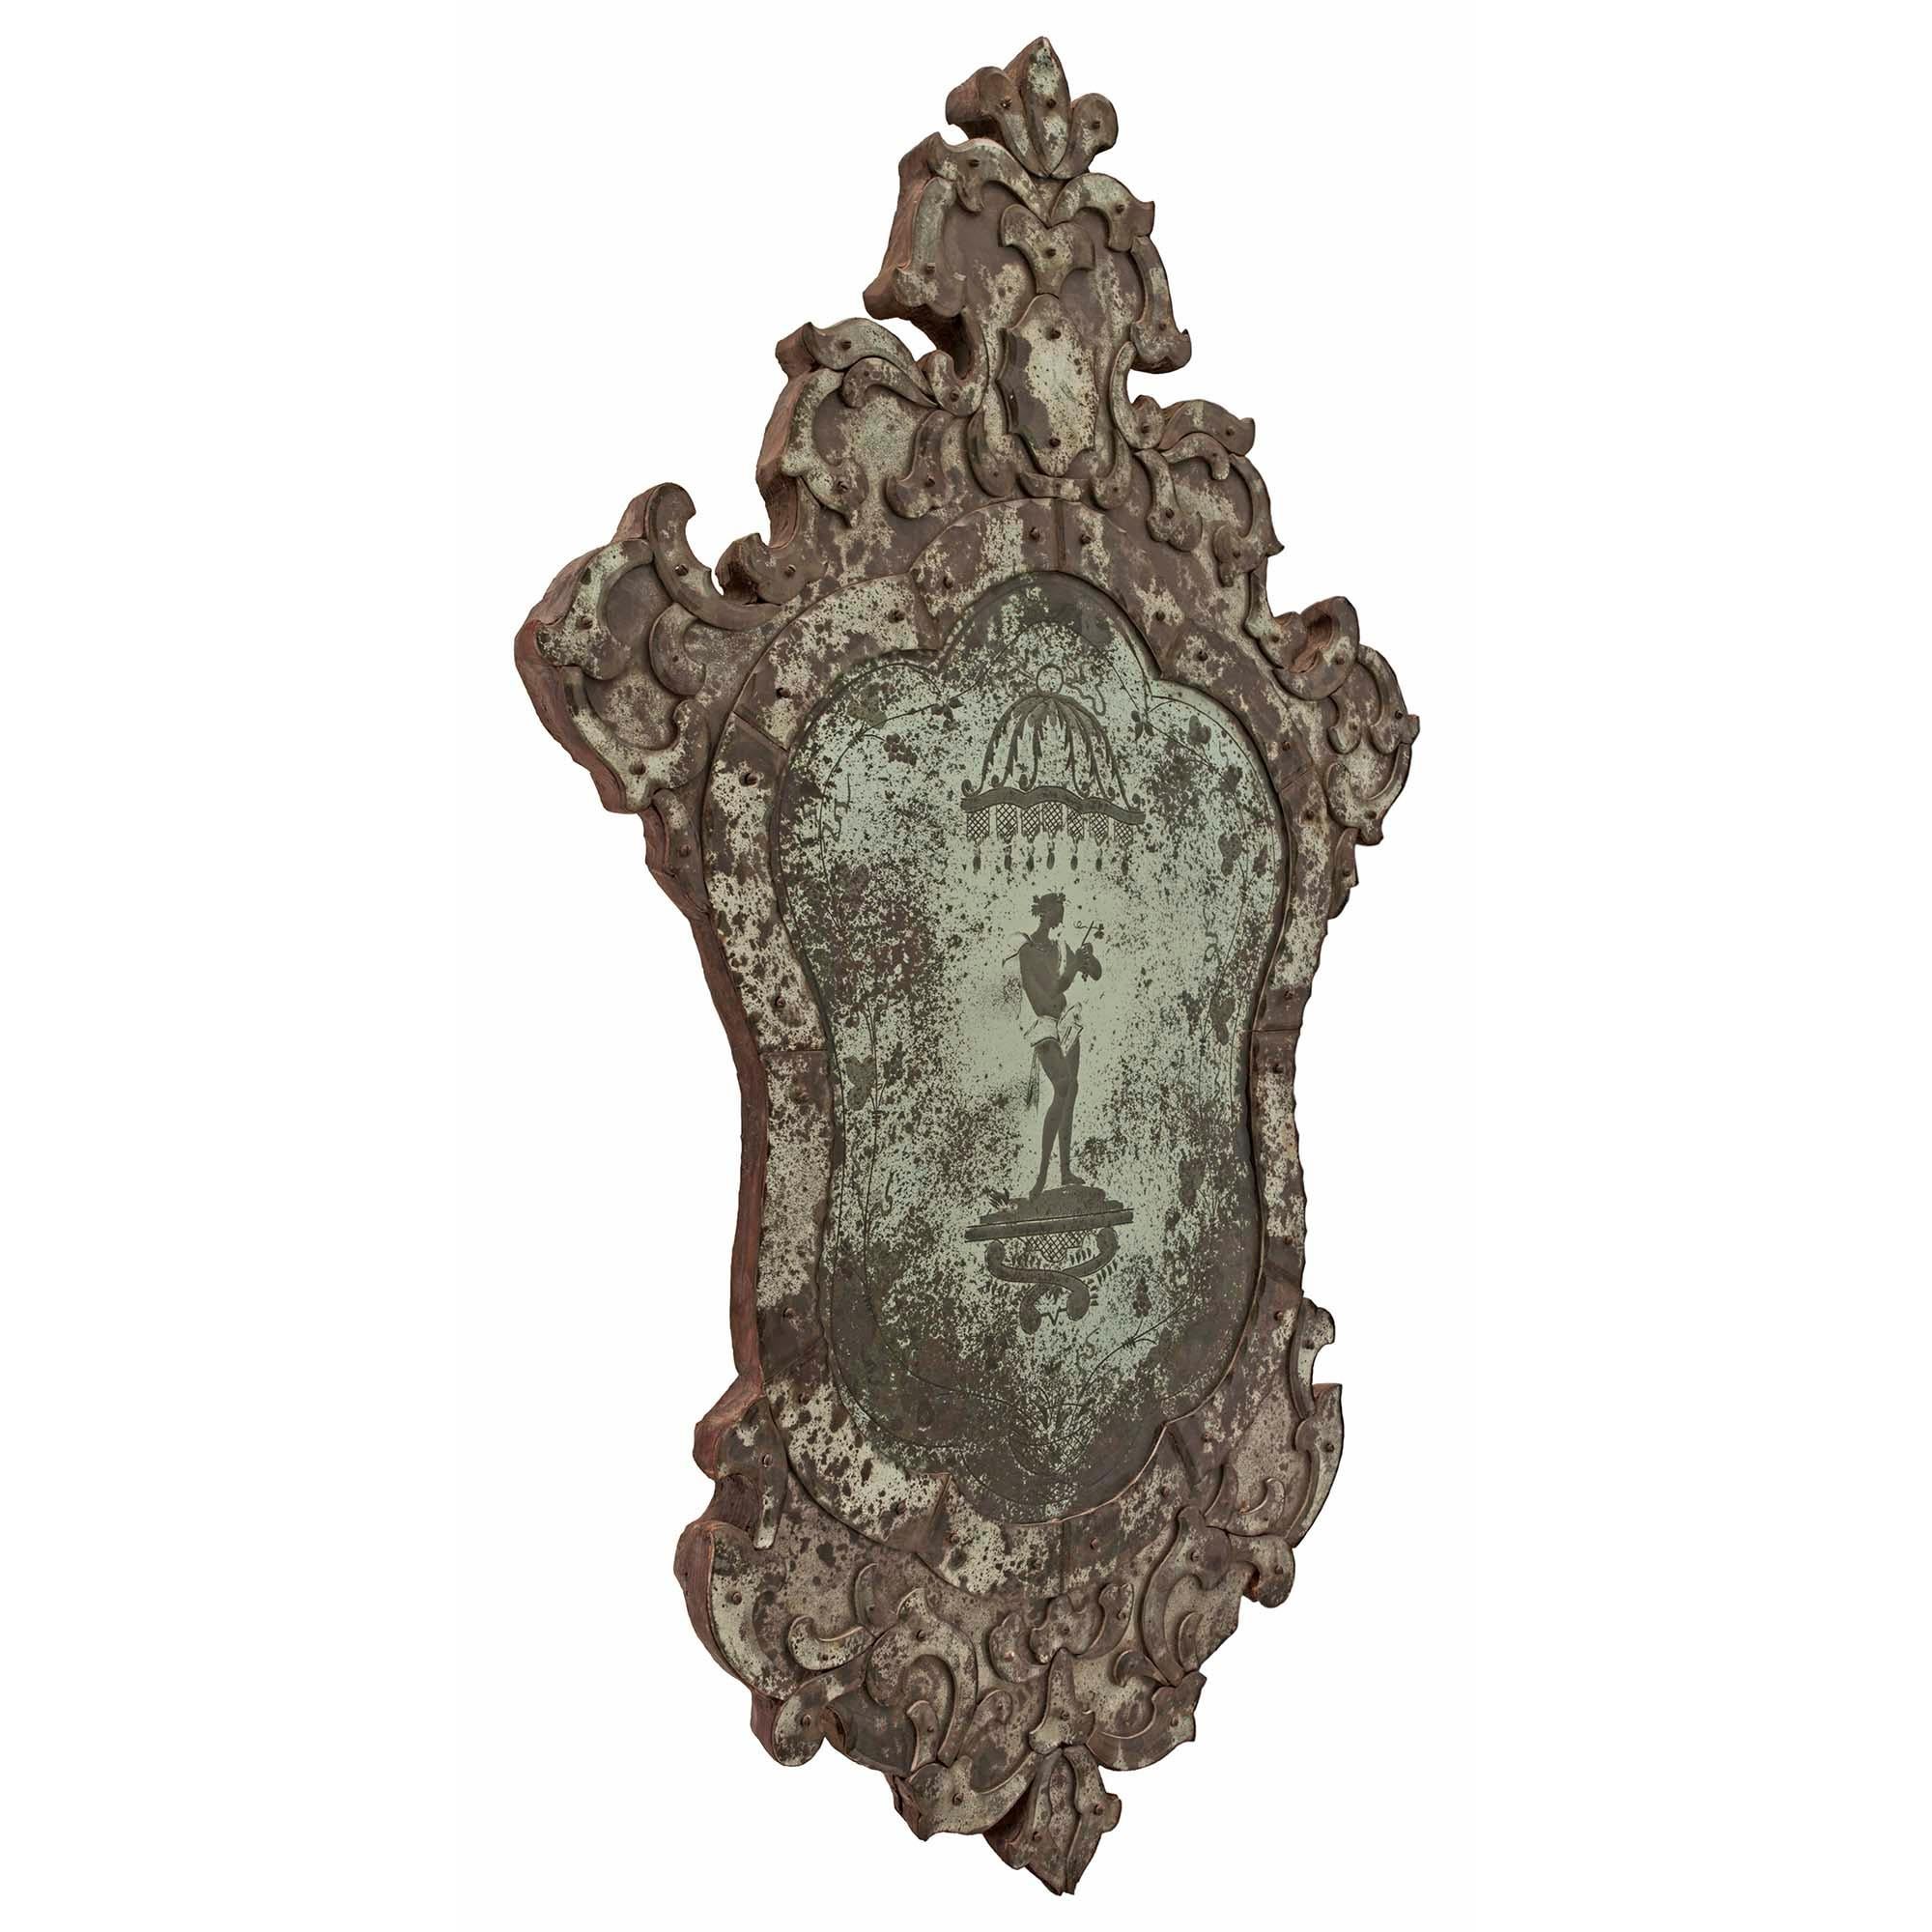 A set of three stunning Italian early 19th century Venetian etched mirrors. The wonderful mirrors have a unique shape with scrolls and foliate frames and an elegant top crown. Each mirror has a central etching of classic roman figures amidst scrolls